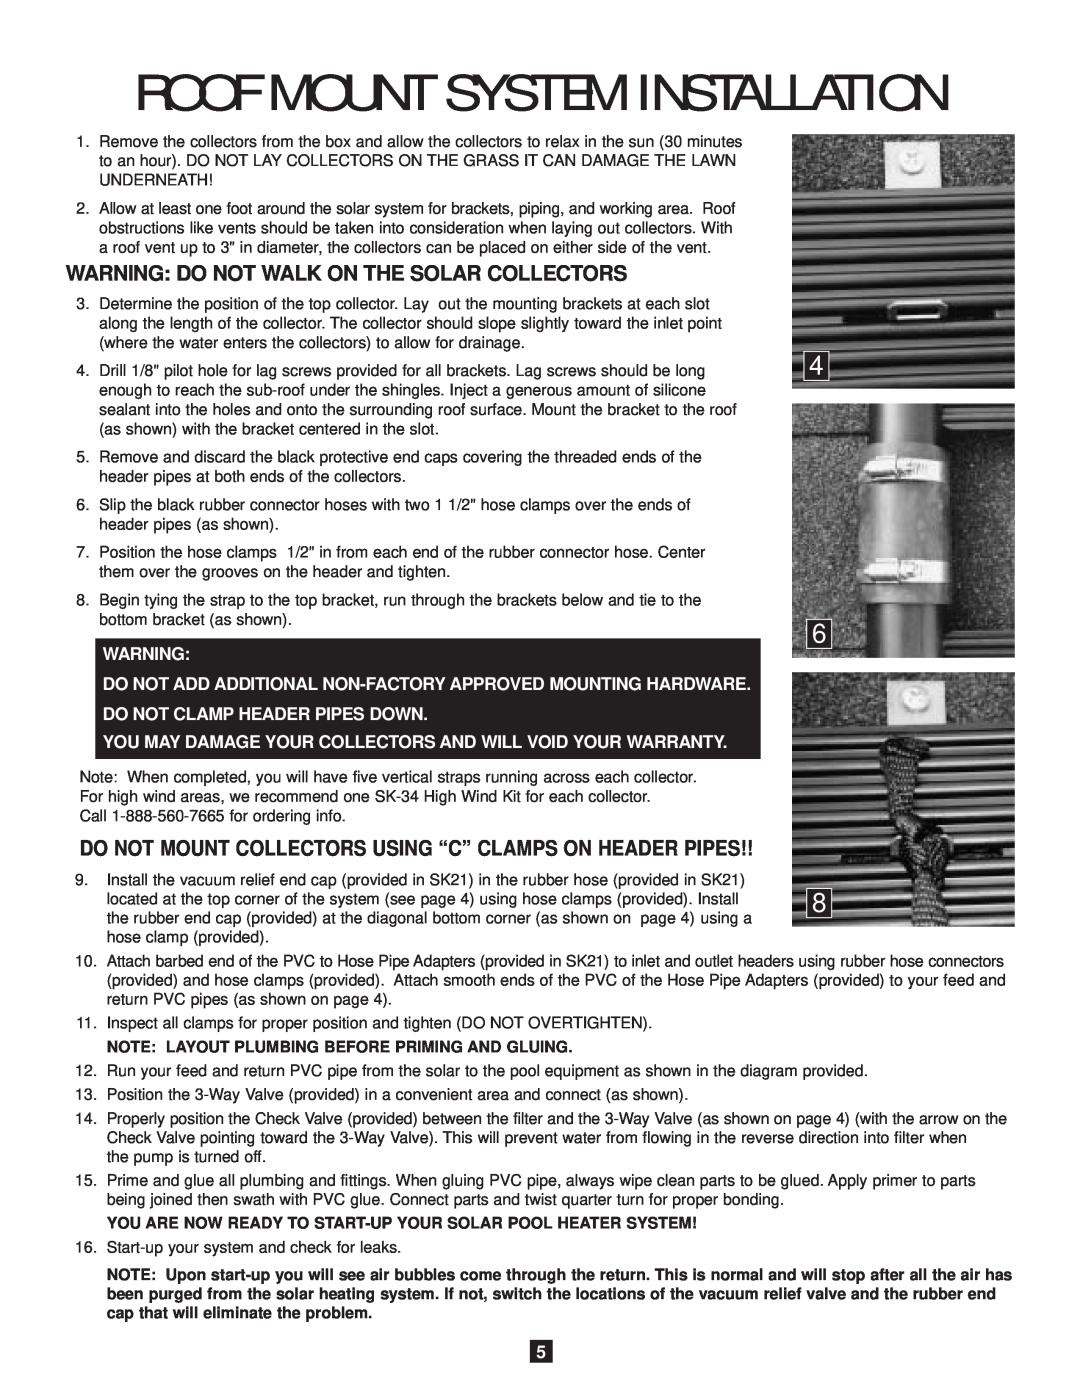 SmartPool Inc S601 operation manual Warning Do Not Walk On The Solar Collectors, Roof Mount System Installation 